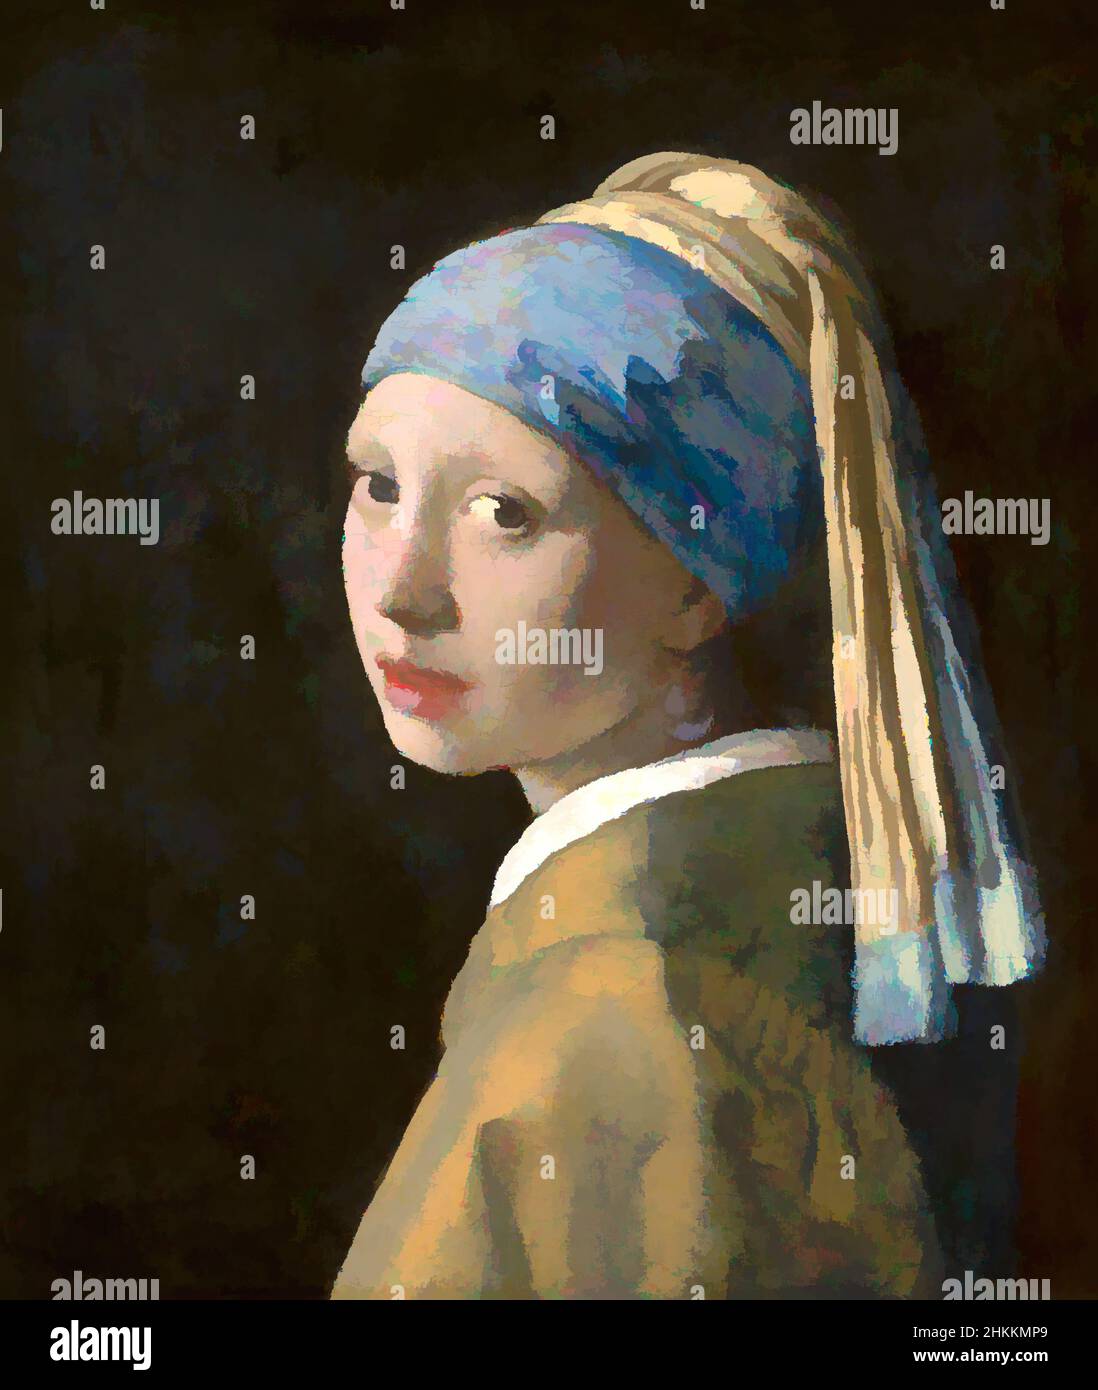 Art inspired by Girl with a Pearl Earring, Johannes Vermeer, c. 1665, Classic works modernized by Artotop with a splash of modernity. Shapes, color and value, eye-catching visual impact on art. Emotions through freedom of artworks in a contemporary way. A timeless message pursuing a wildly creative new direction. Artists turning to the digital medium and creating the Artotop NFT Stock Photo